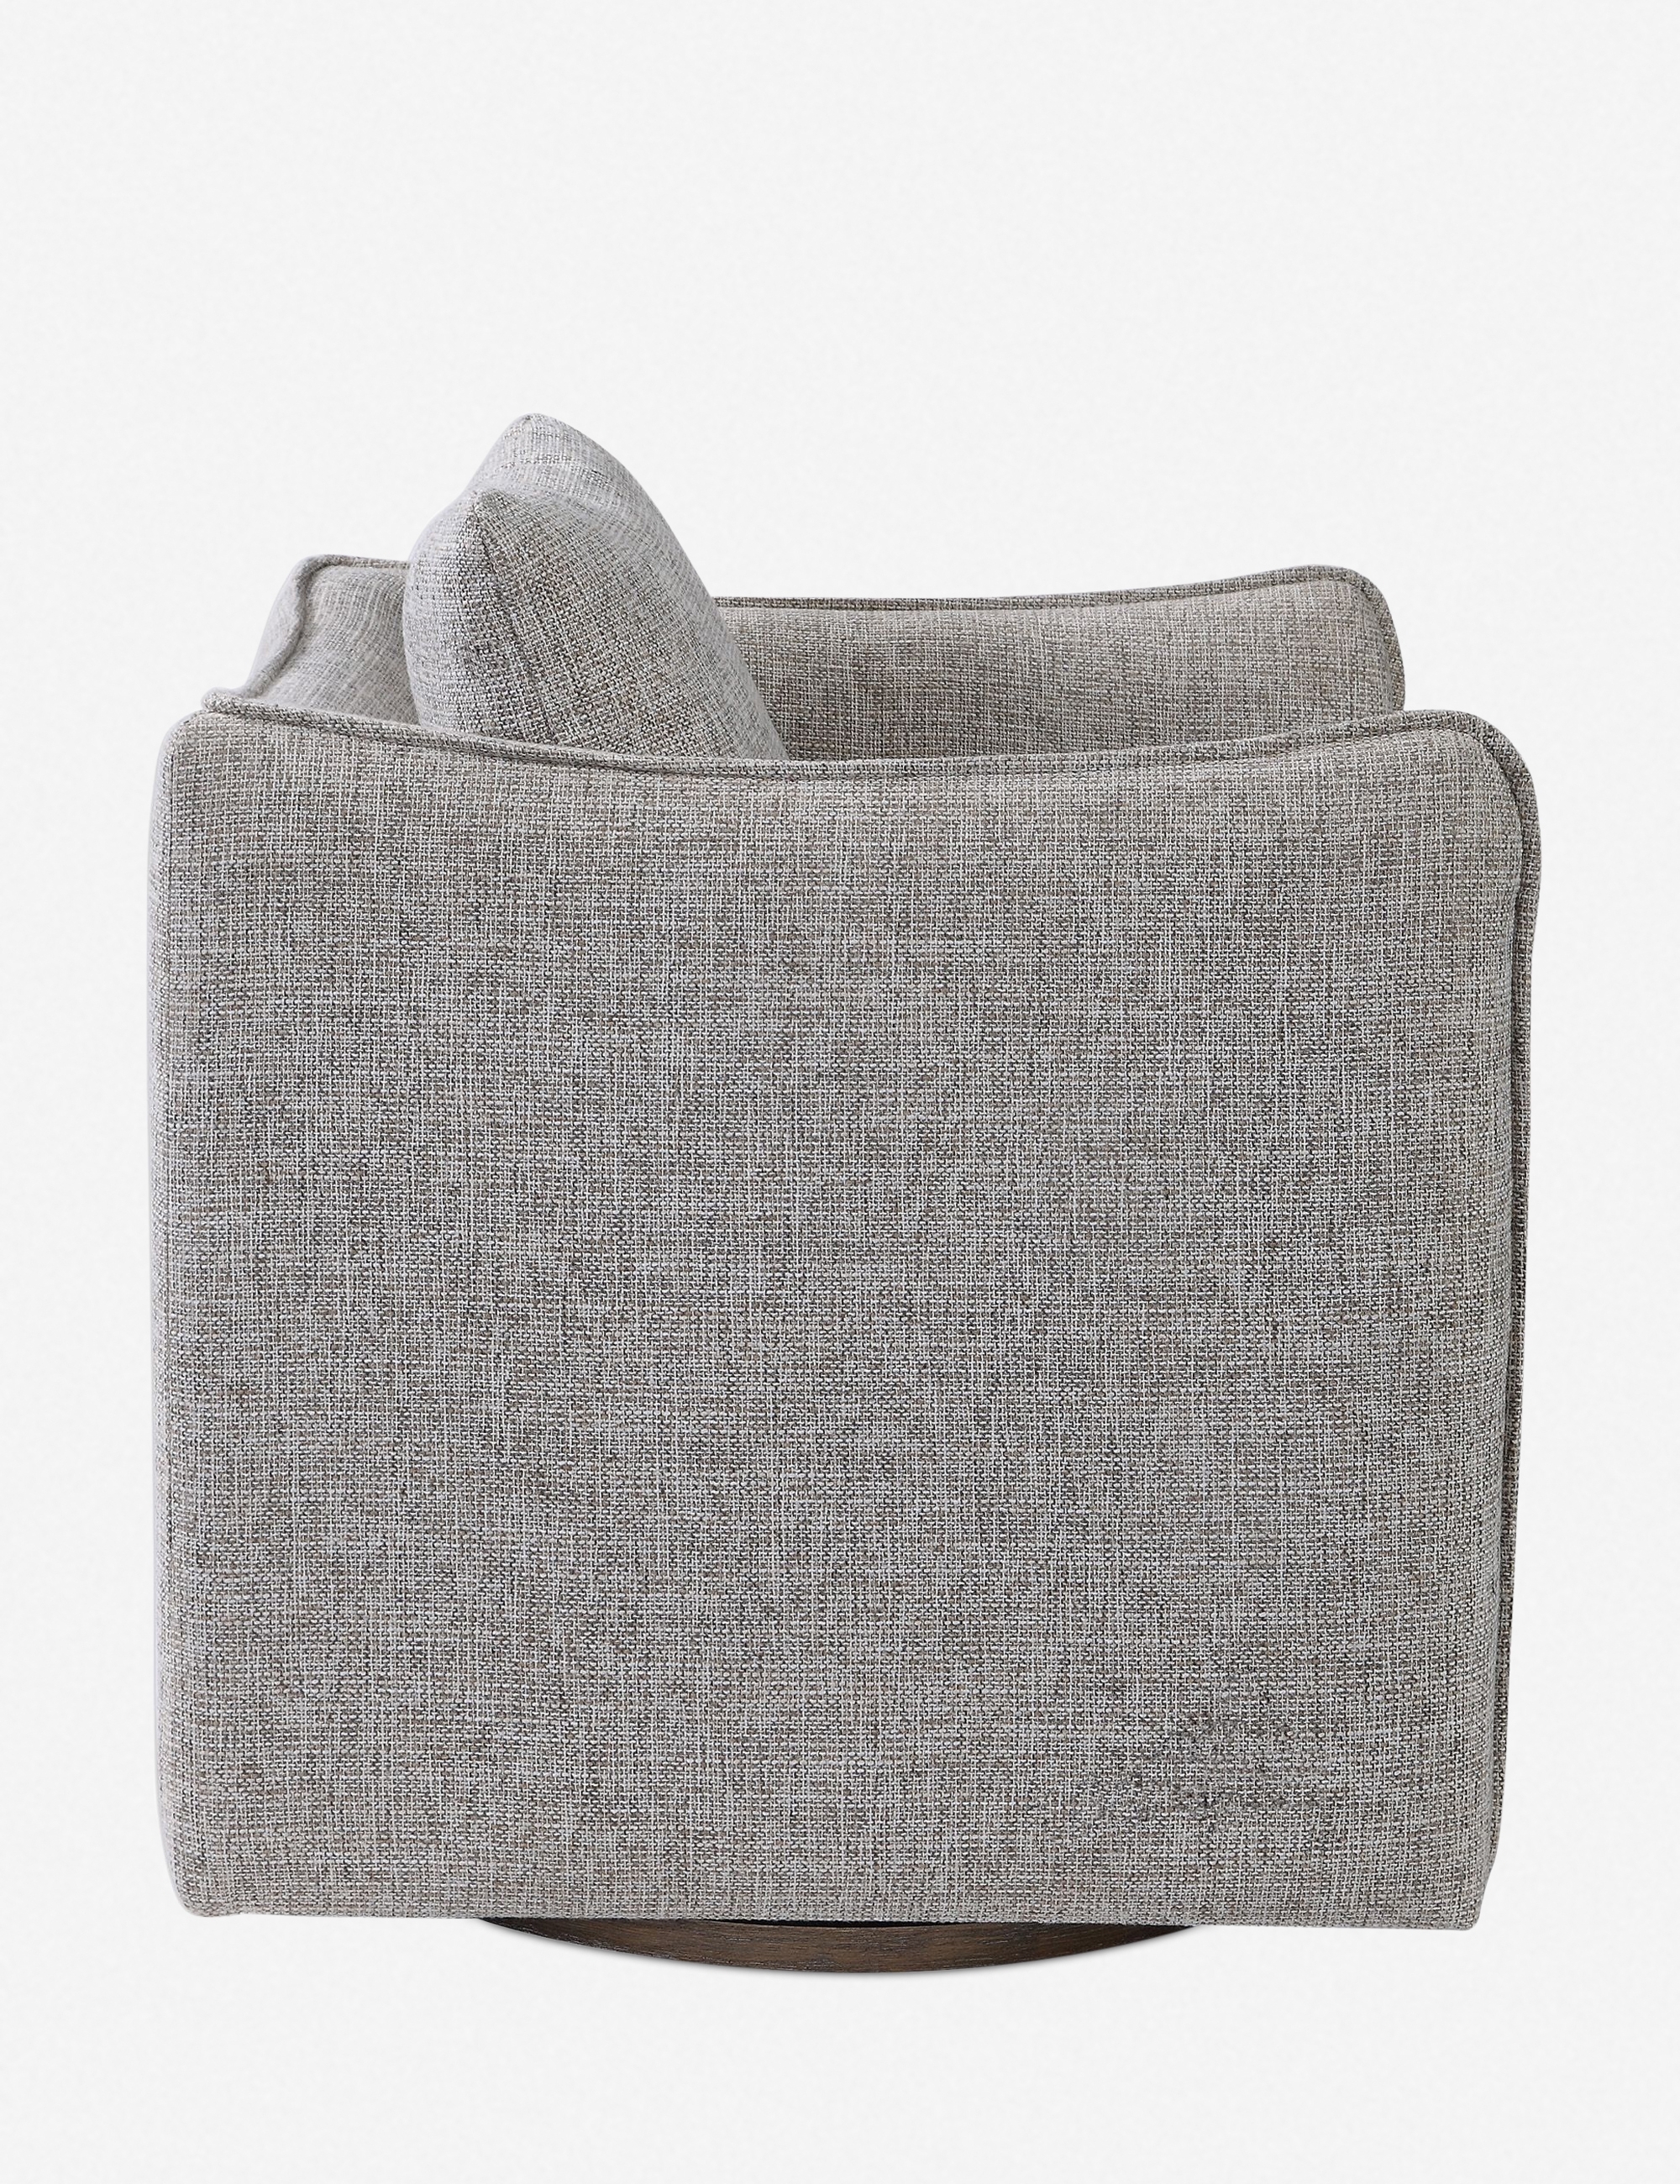 Aisling Swivel Chair - Image 5